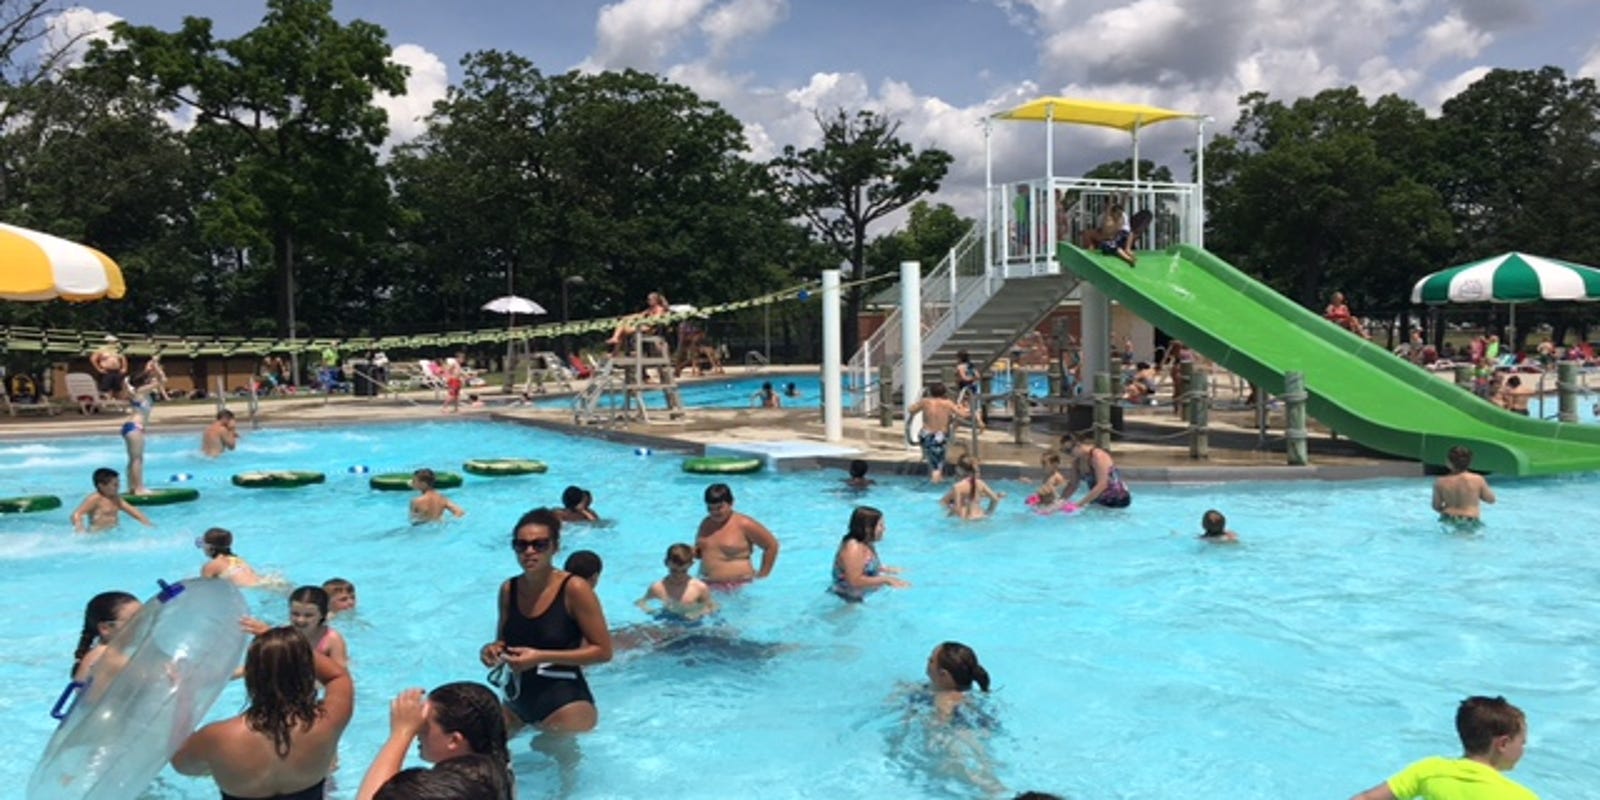 what public pools are open today